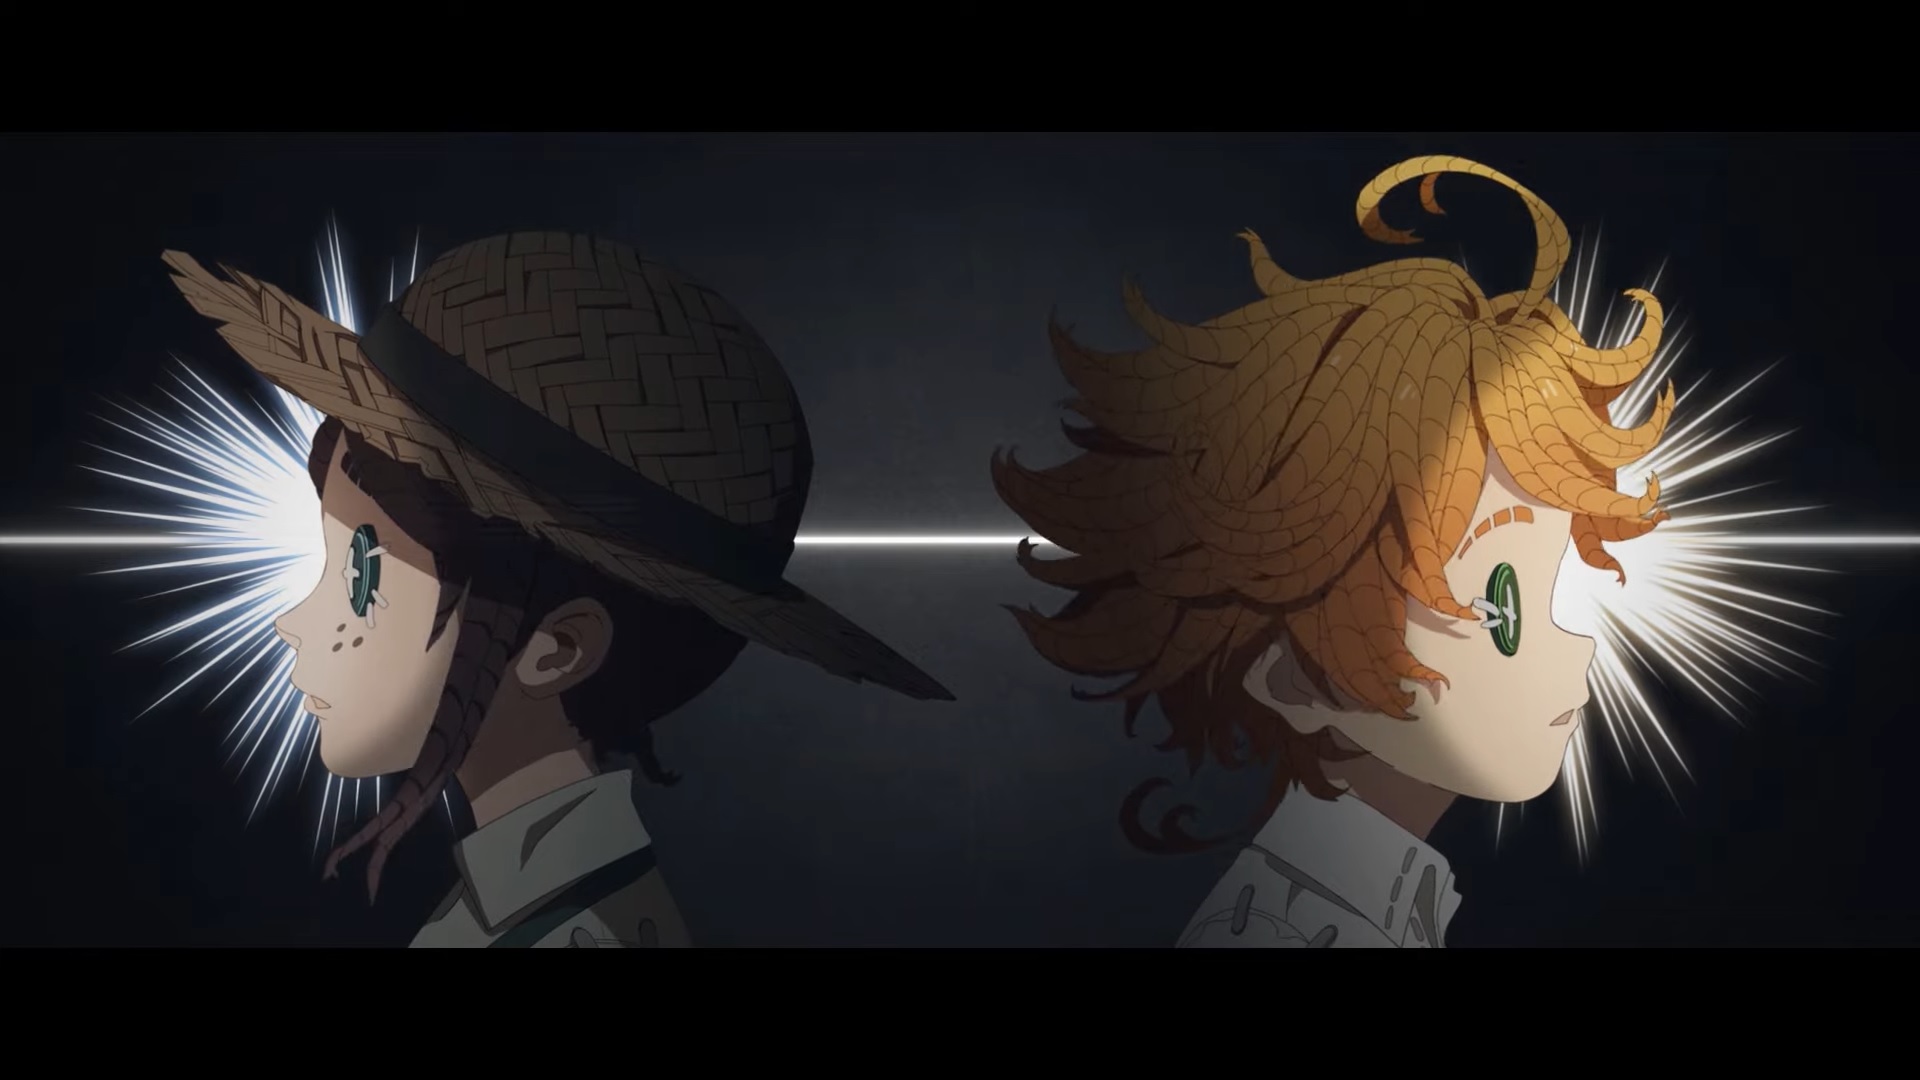 The Promised Neverland Ending: Inconsistency, Indecision and Long